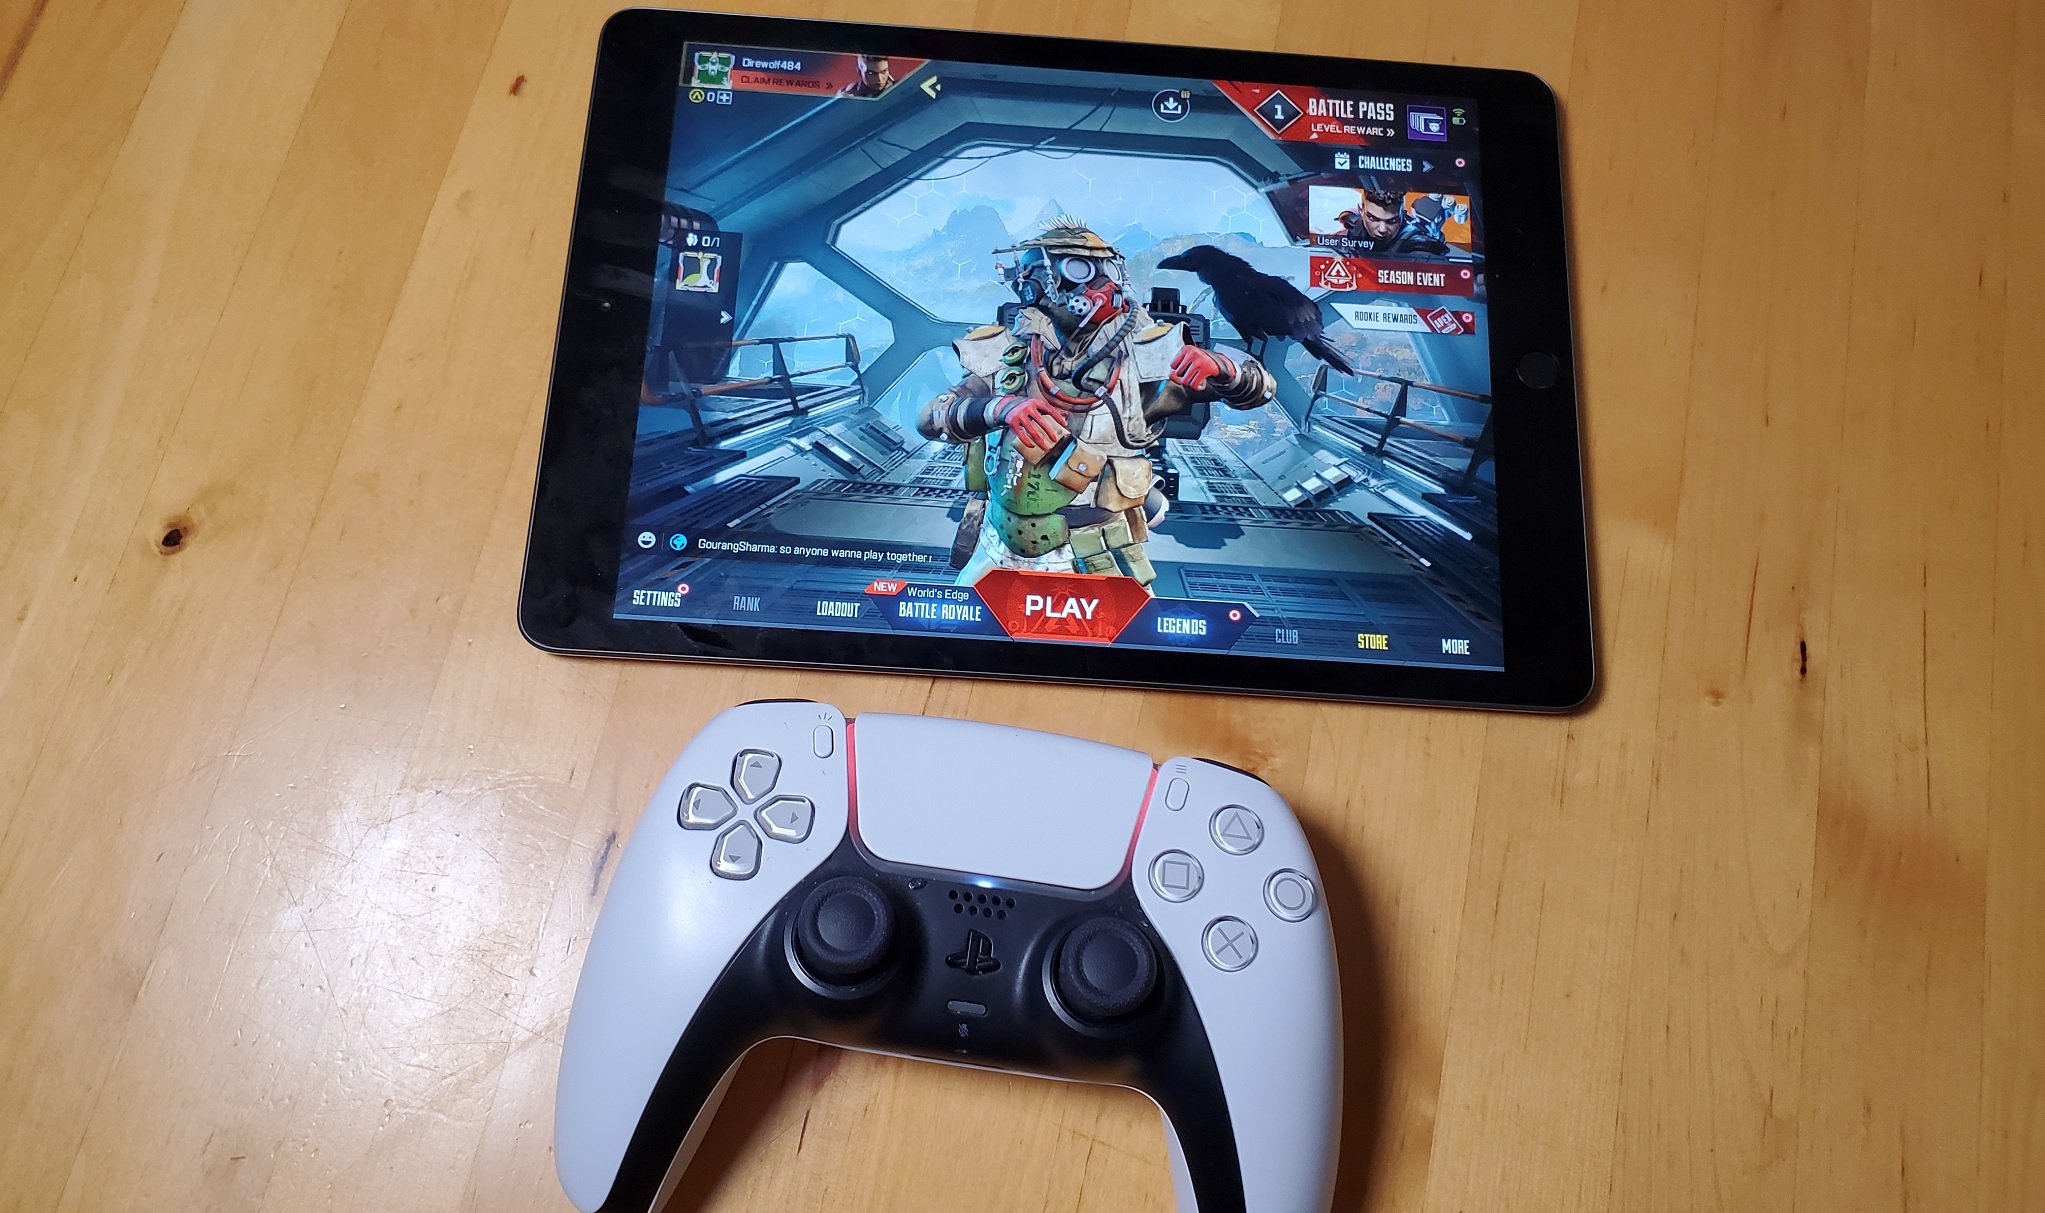 How to play with your friends in Apex Legends Mobile - Android